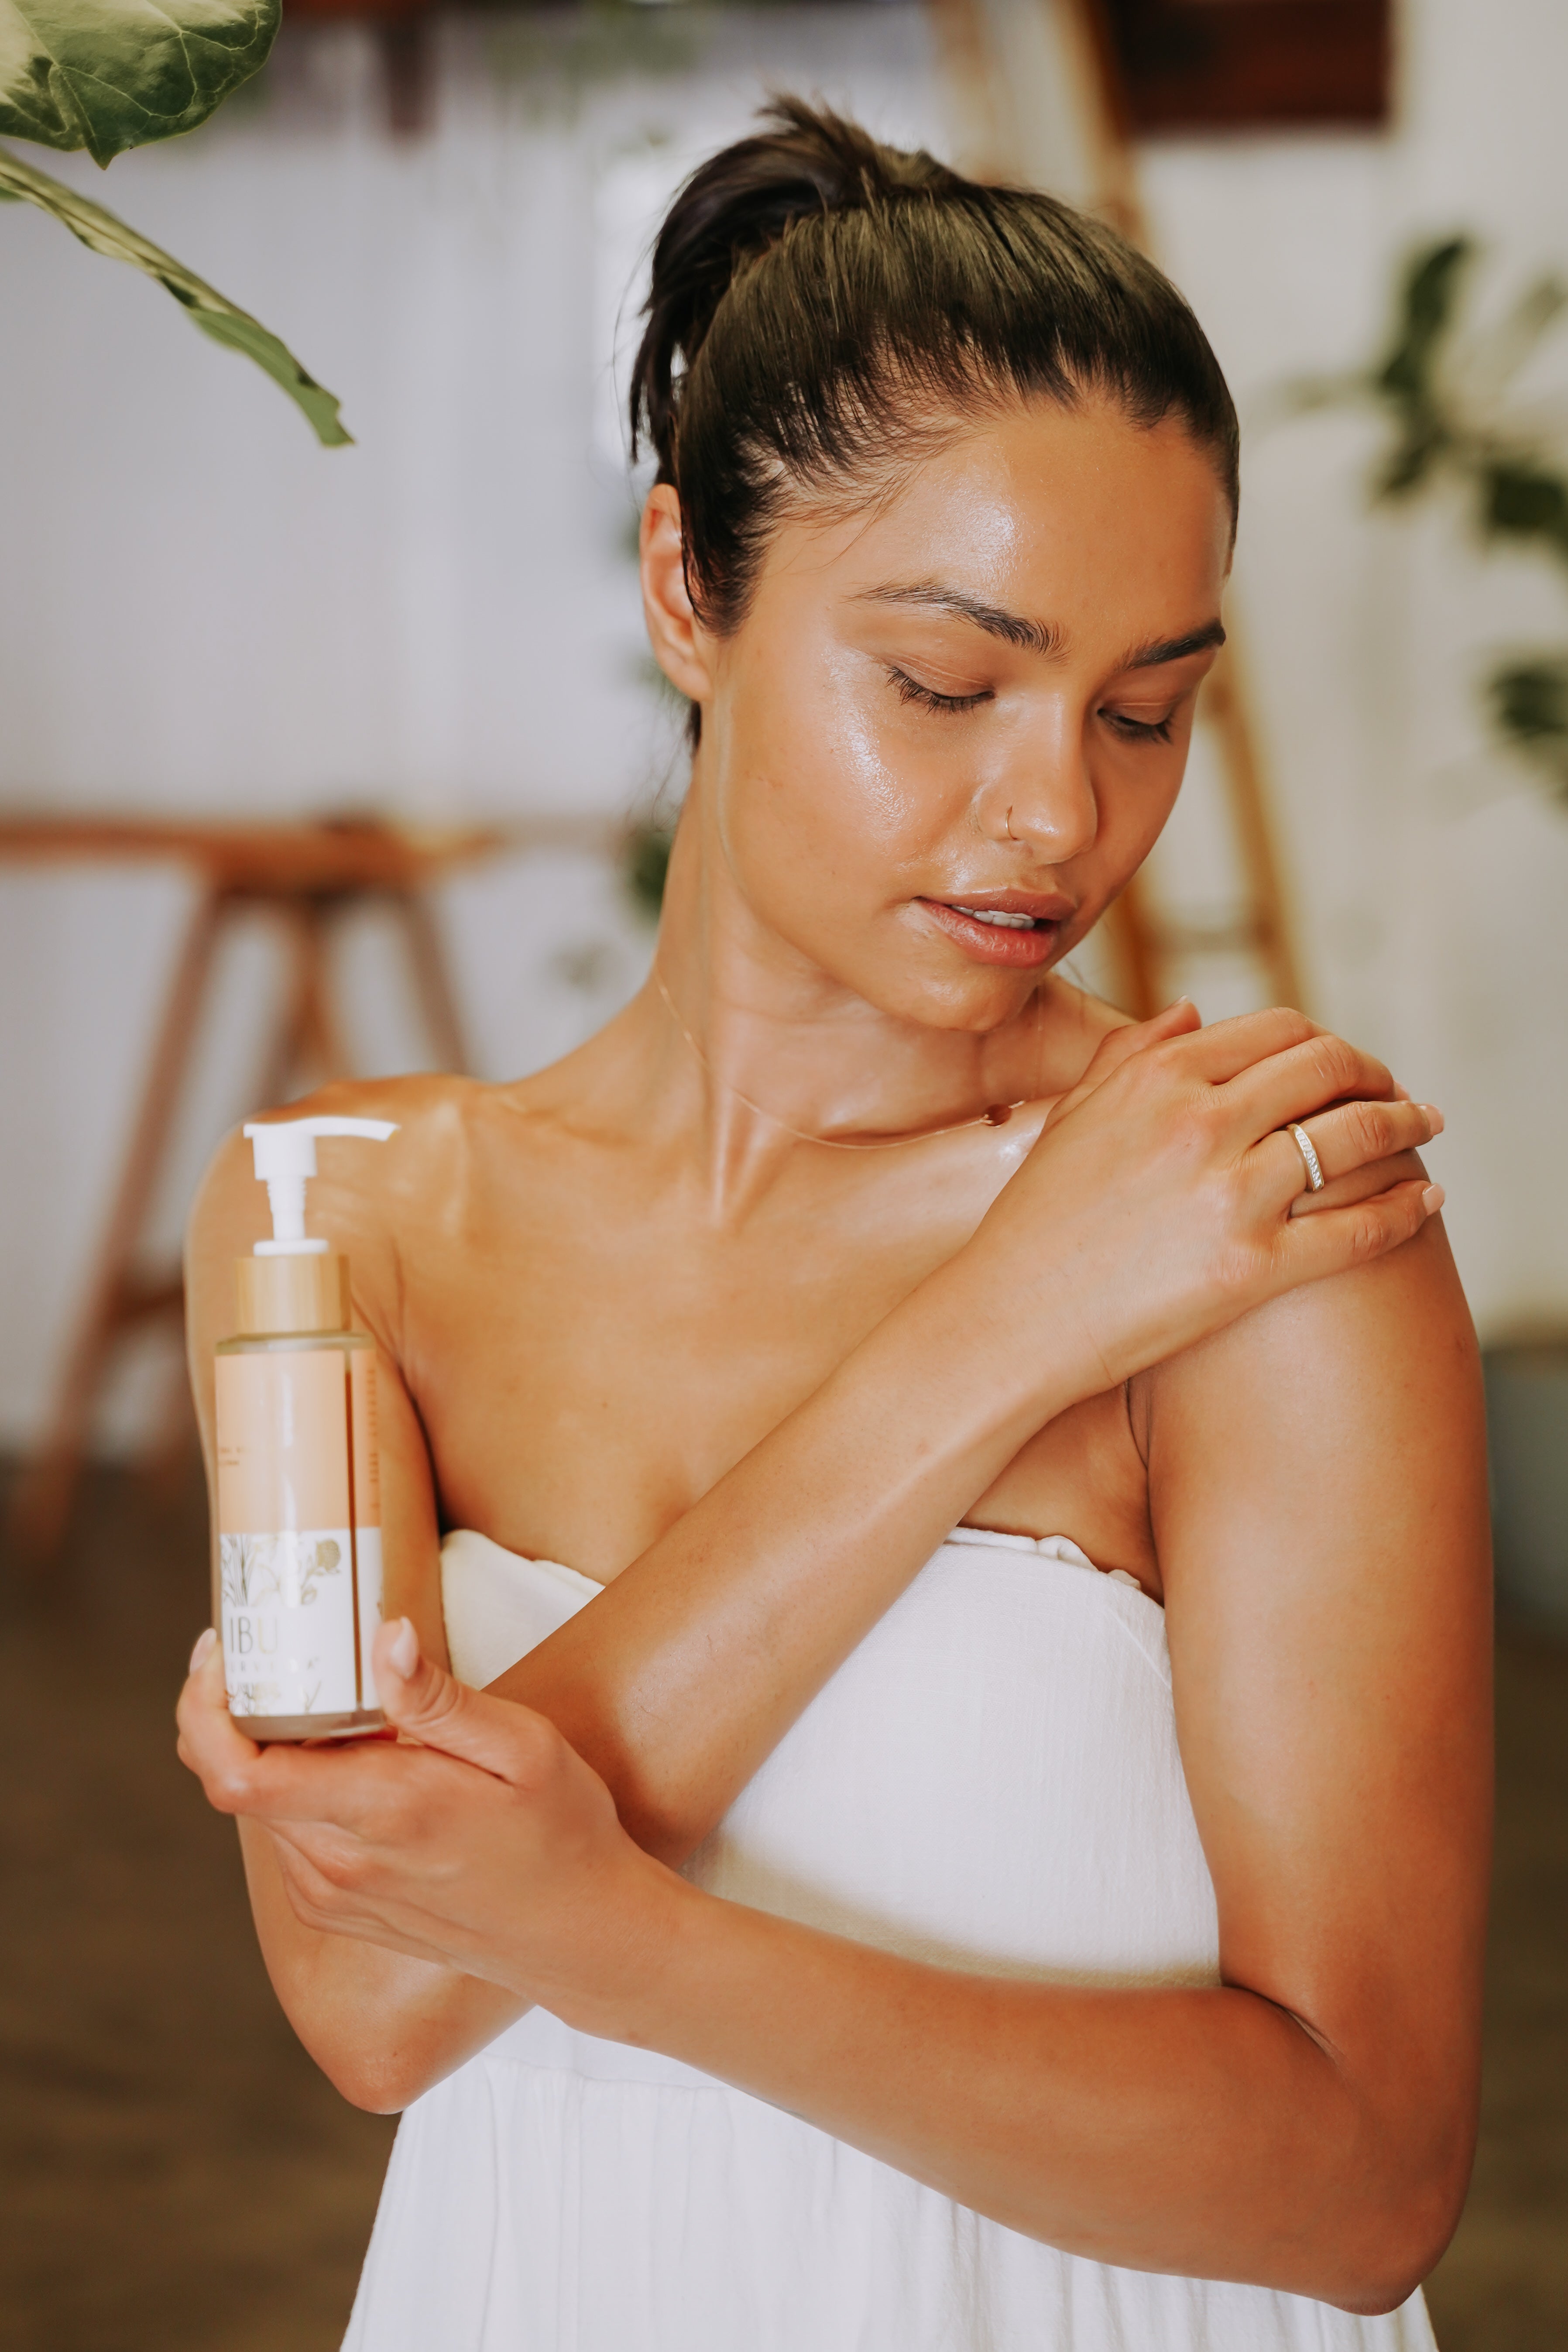 Self Love Routine - Founder Justene shares an Ayurvedic routine for inner and outer radiance